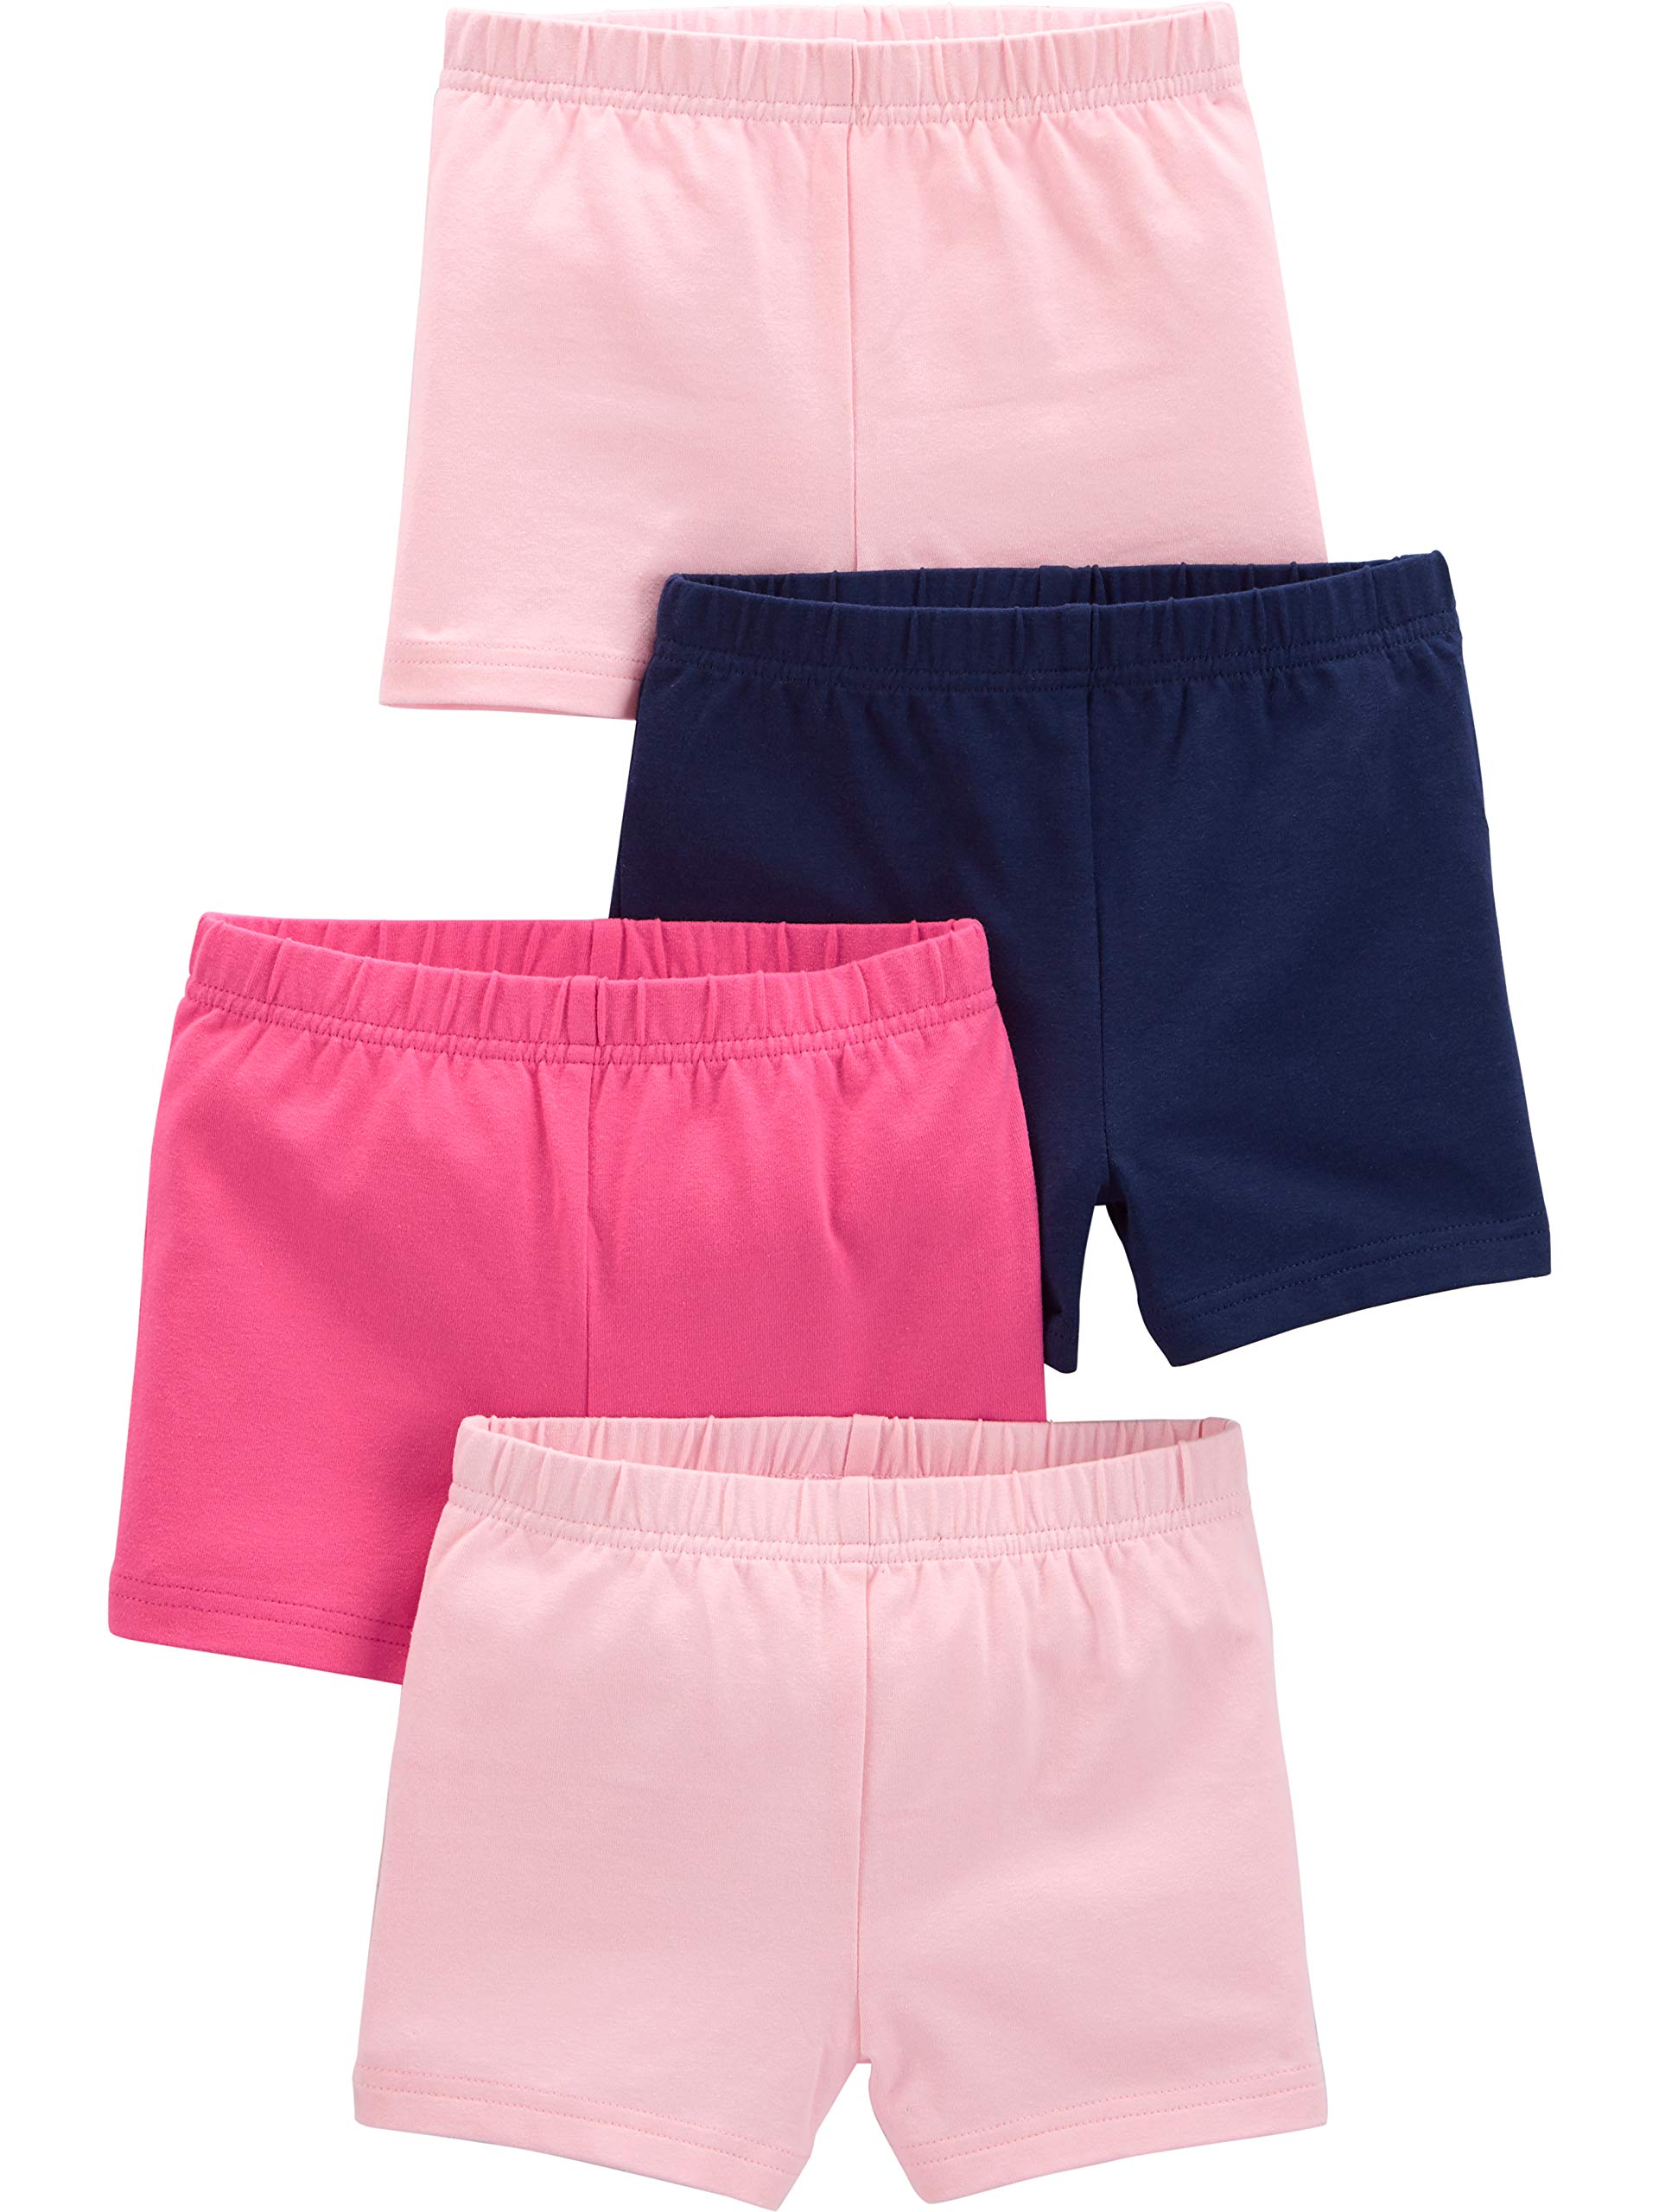 Simple Joys by Carter's Girls and Toddlers' Tumbling Shorts, Pack of 4